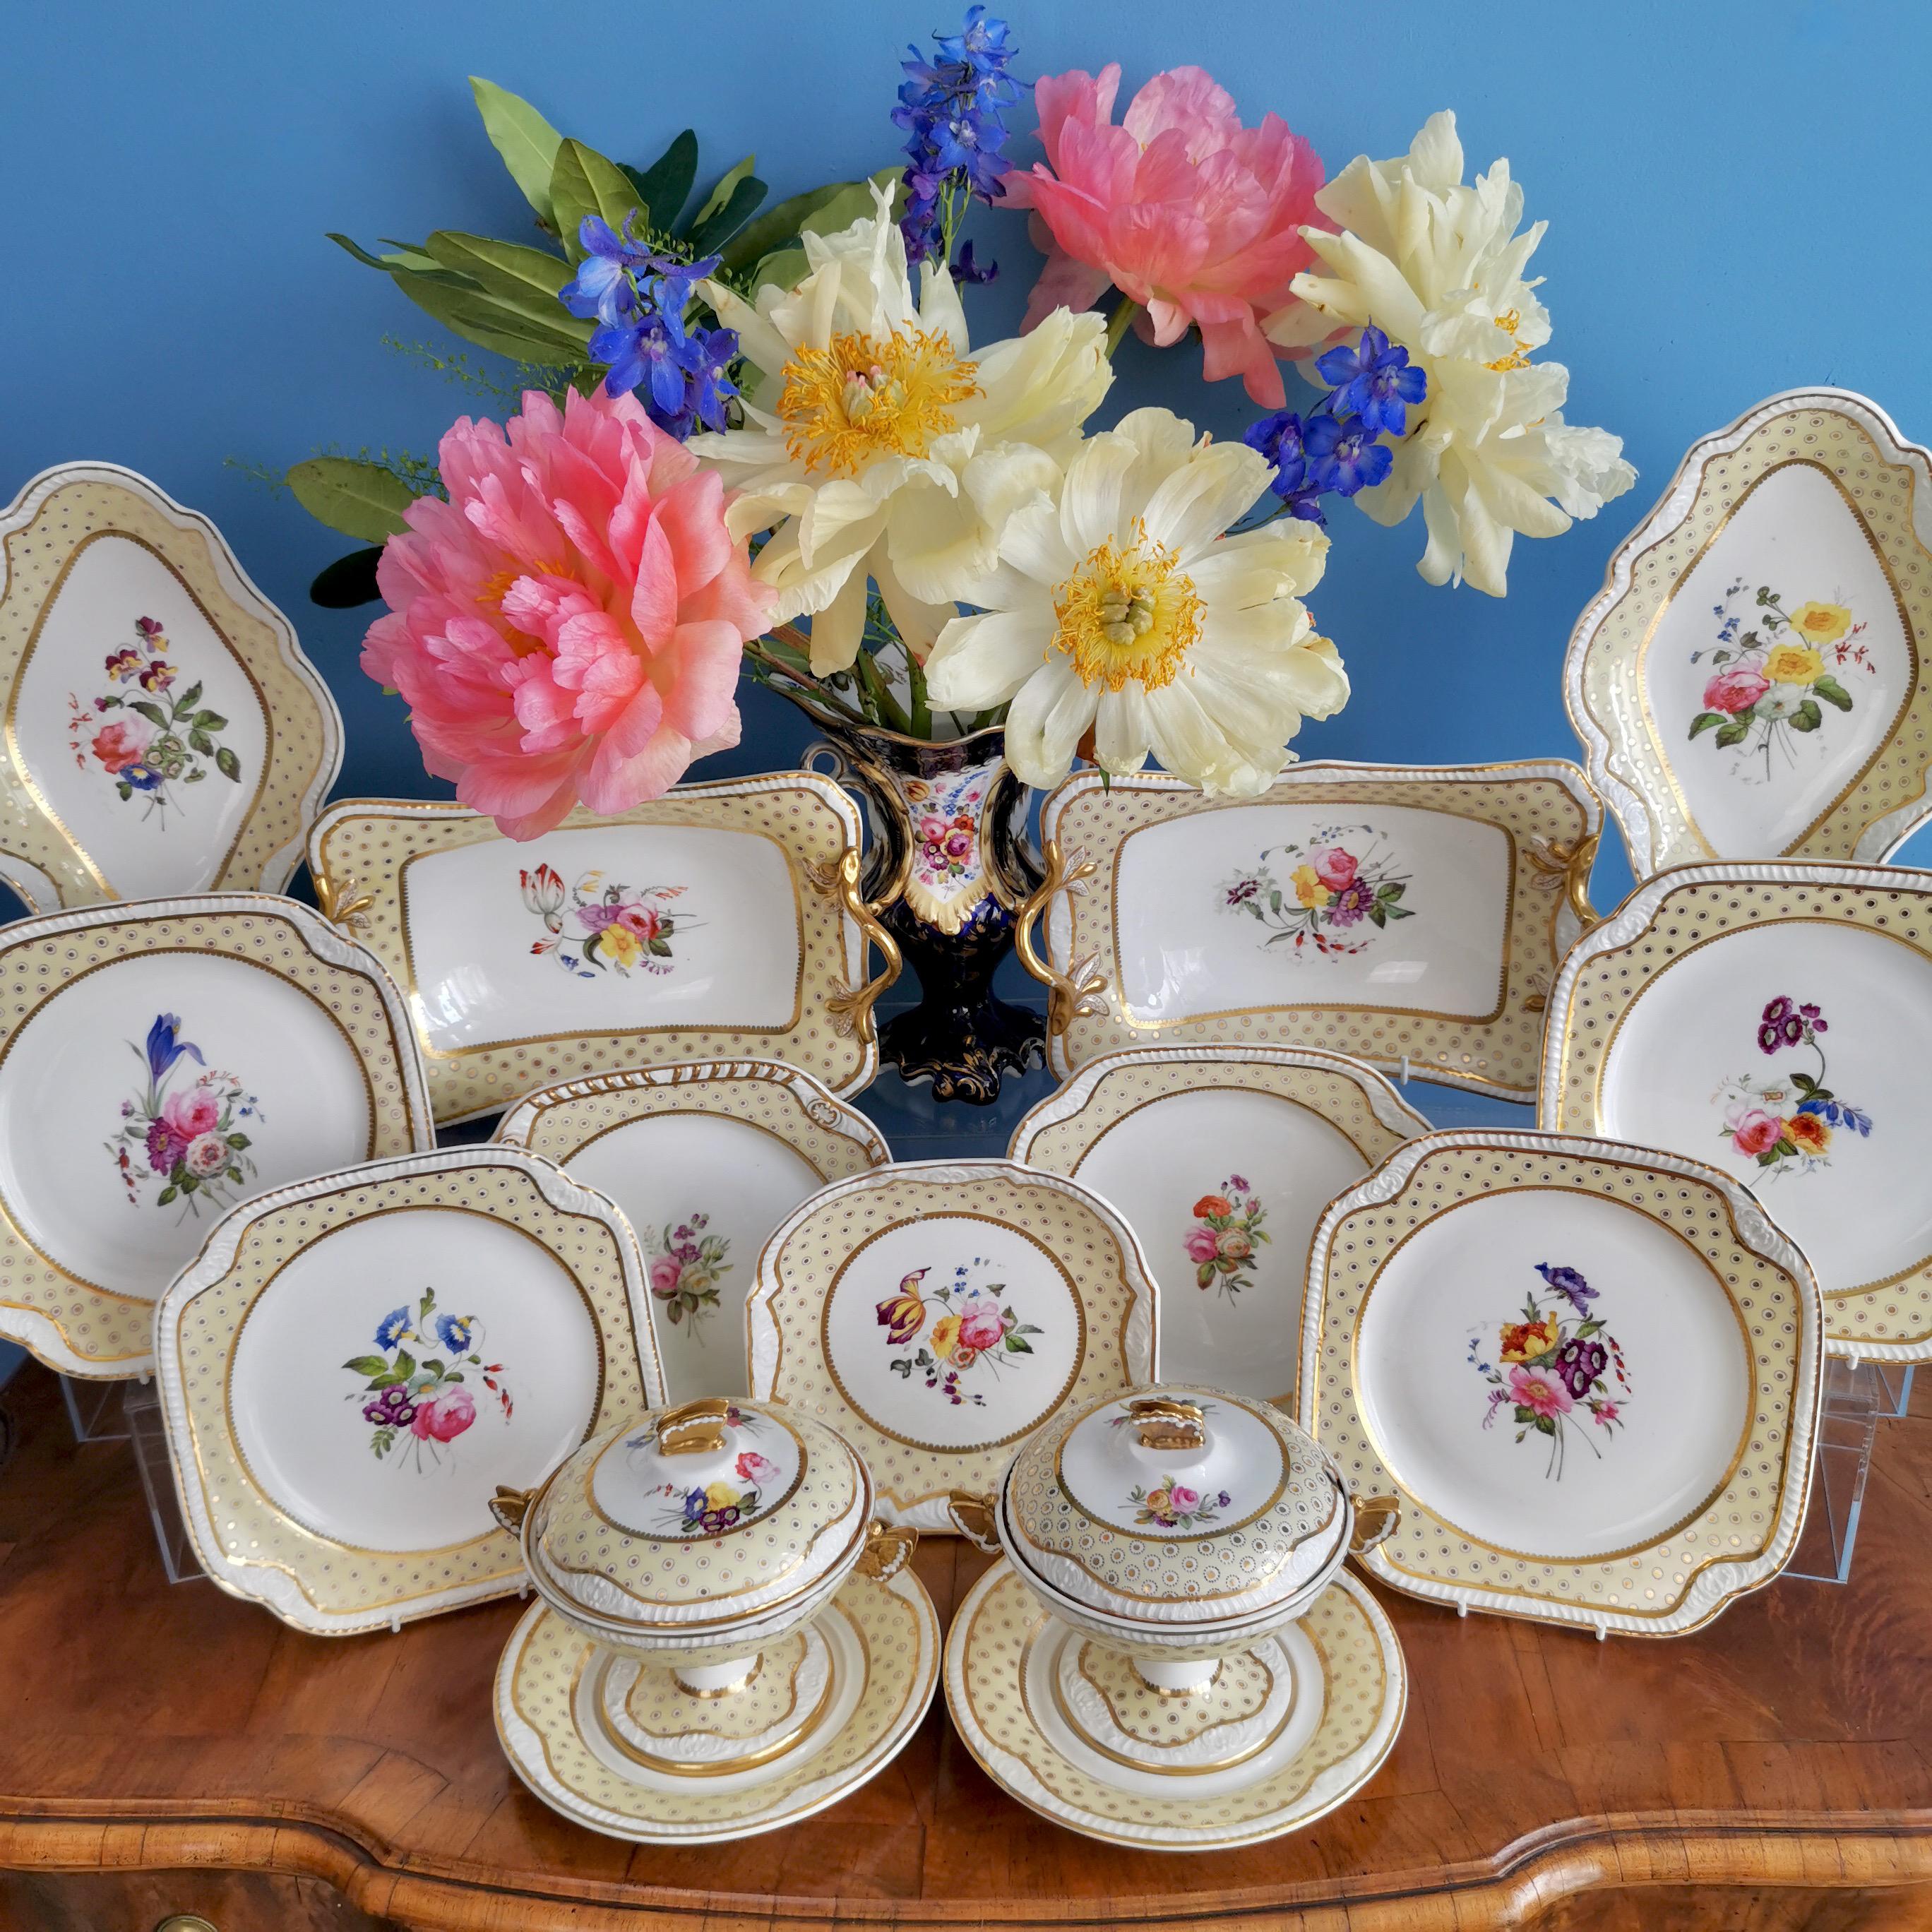 This is a stunning and very rare dessert service made by Spode in 1822, which was the Regency era. This beautiful service, which is in perfect condition, would be fantastic for a summer dinner party!

The service is made of Felspar porcelain and